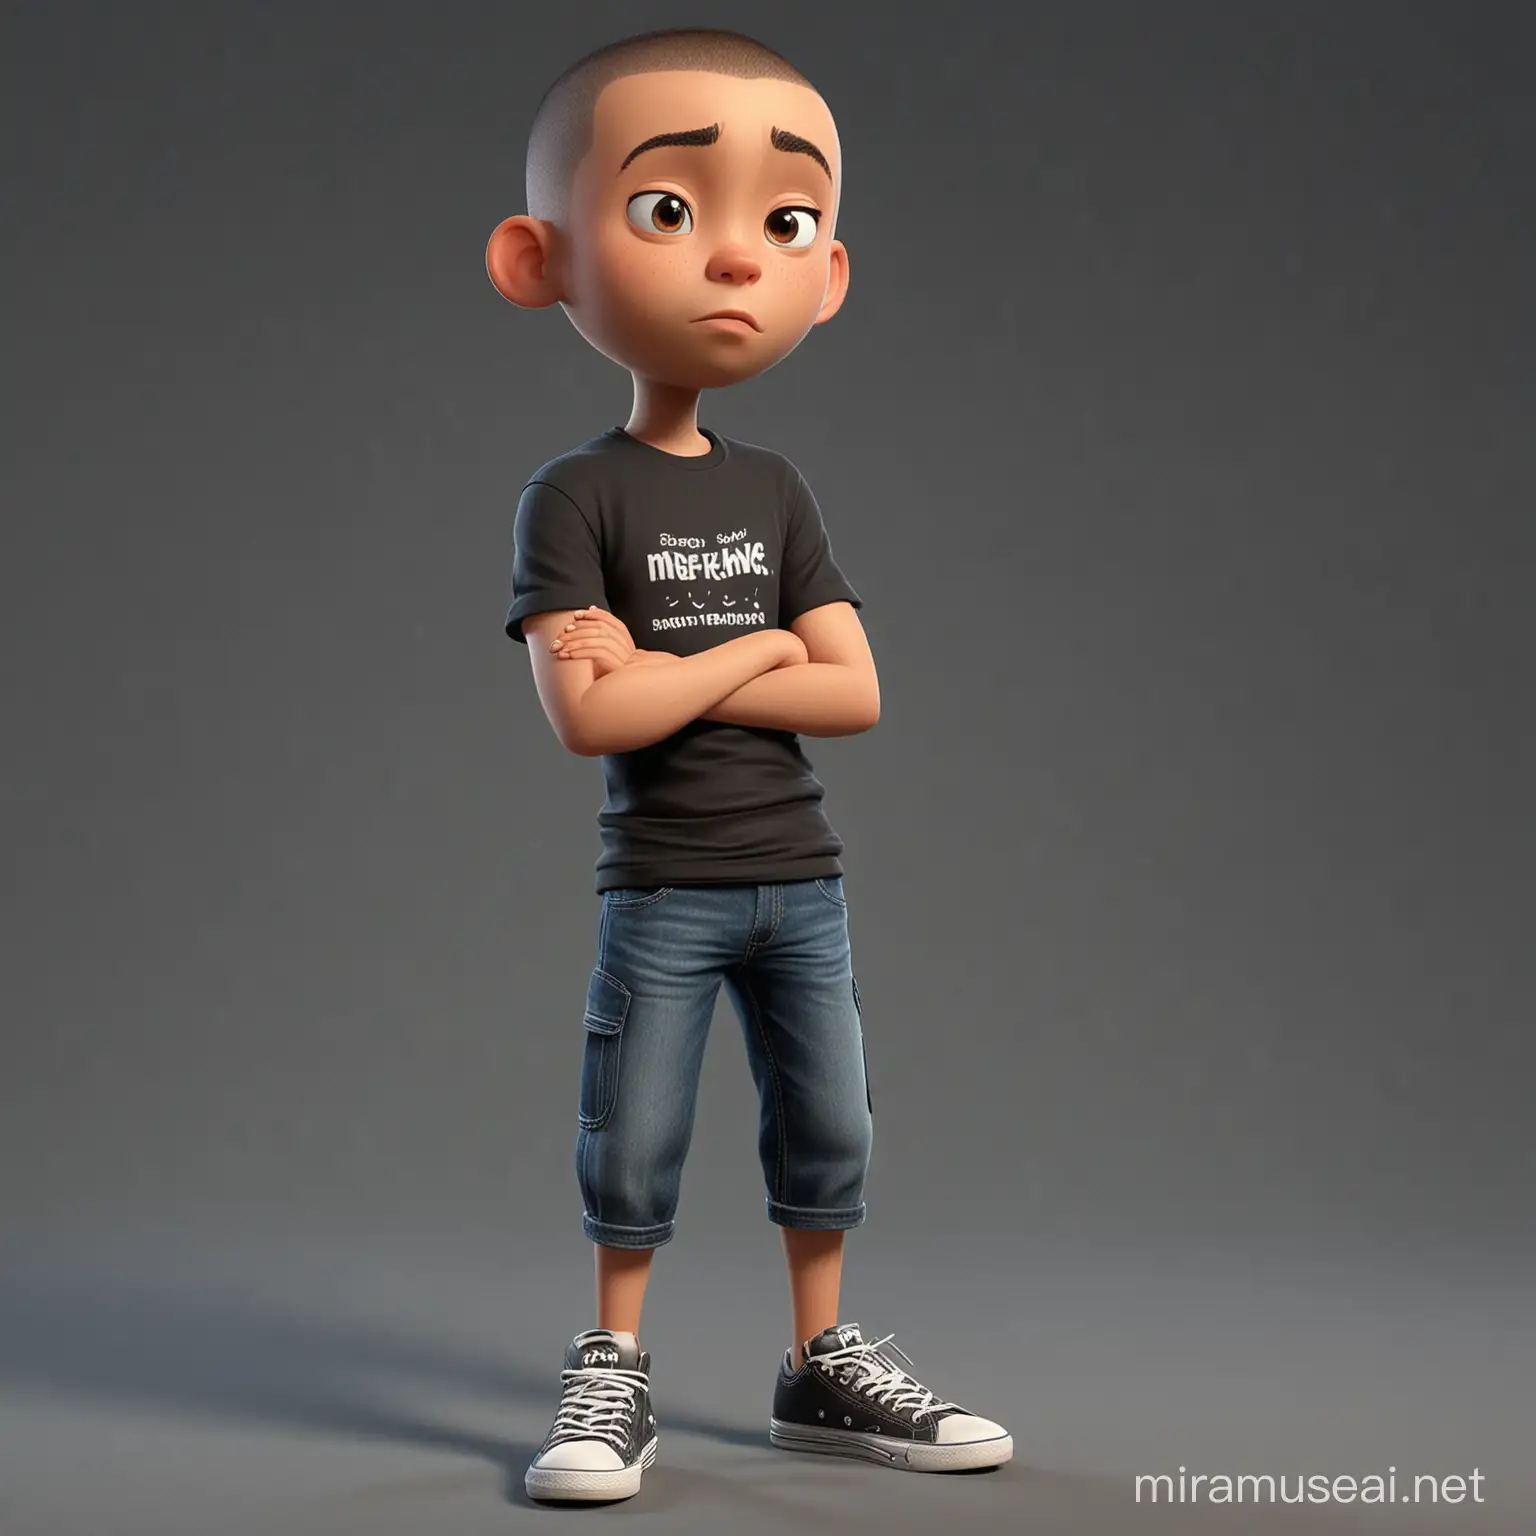 Cartoon Style Indonesian Boy with Skeptical Expression in Black TShirt and Jeans